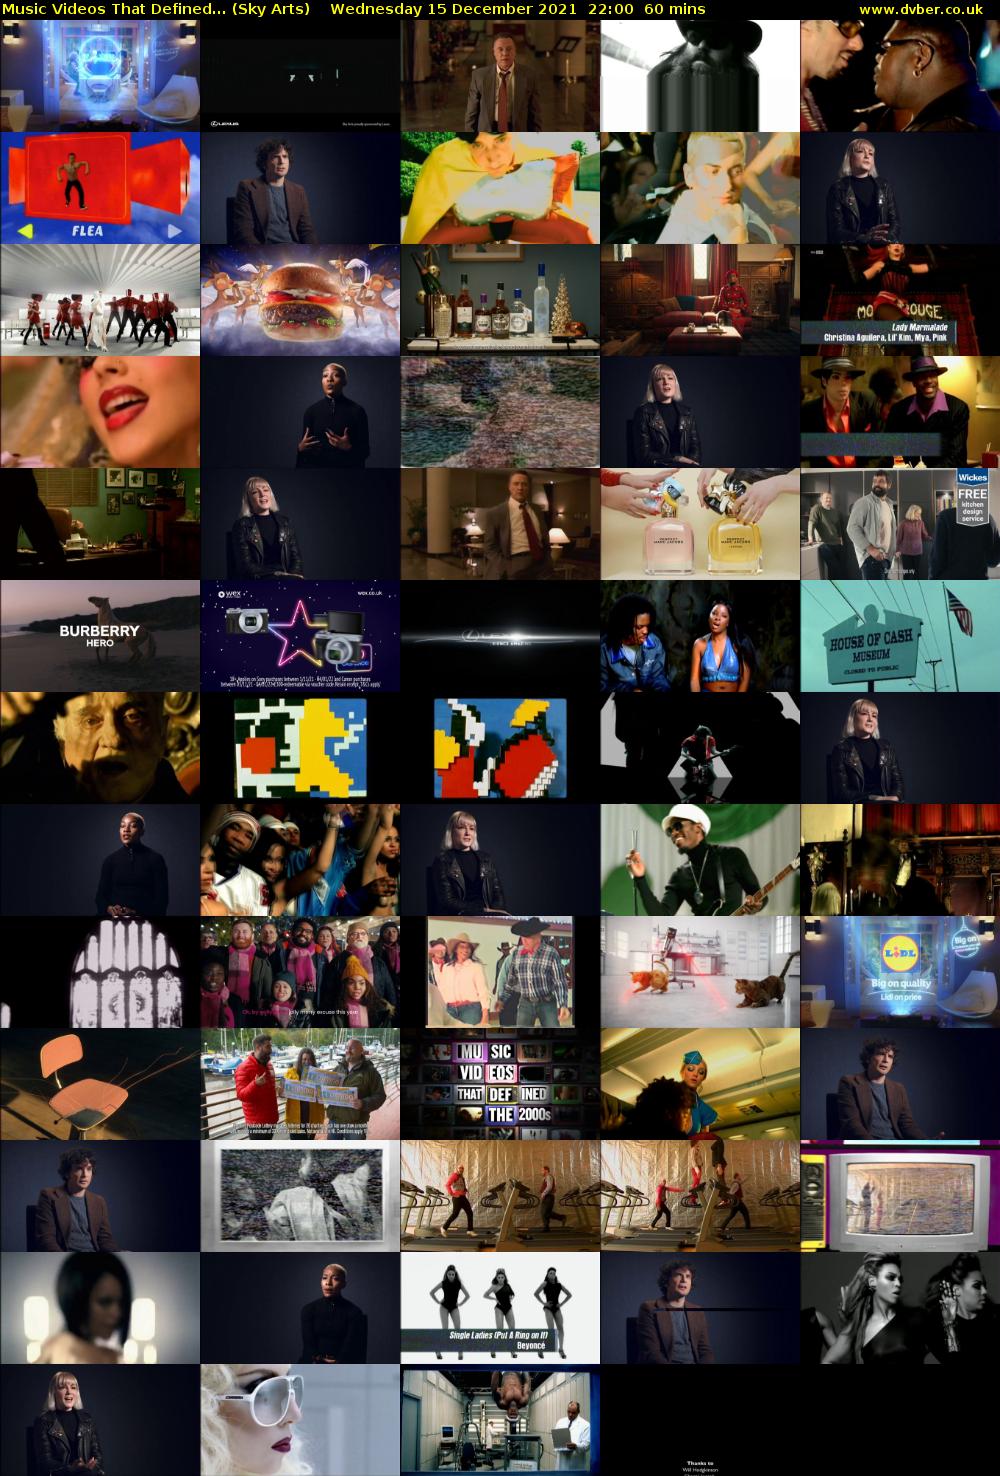 Music Videos That Defined... (Sky Arts) Wednesday 15 December 2021 22:00 - 23:00